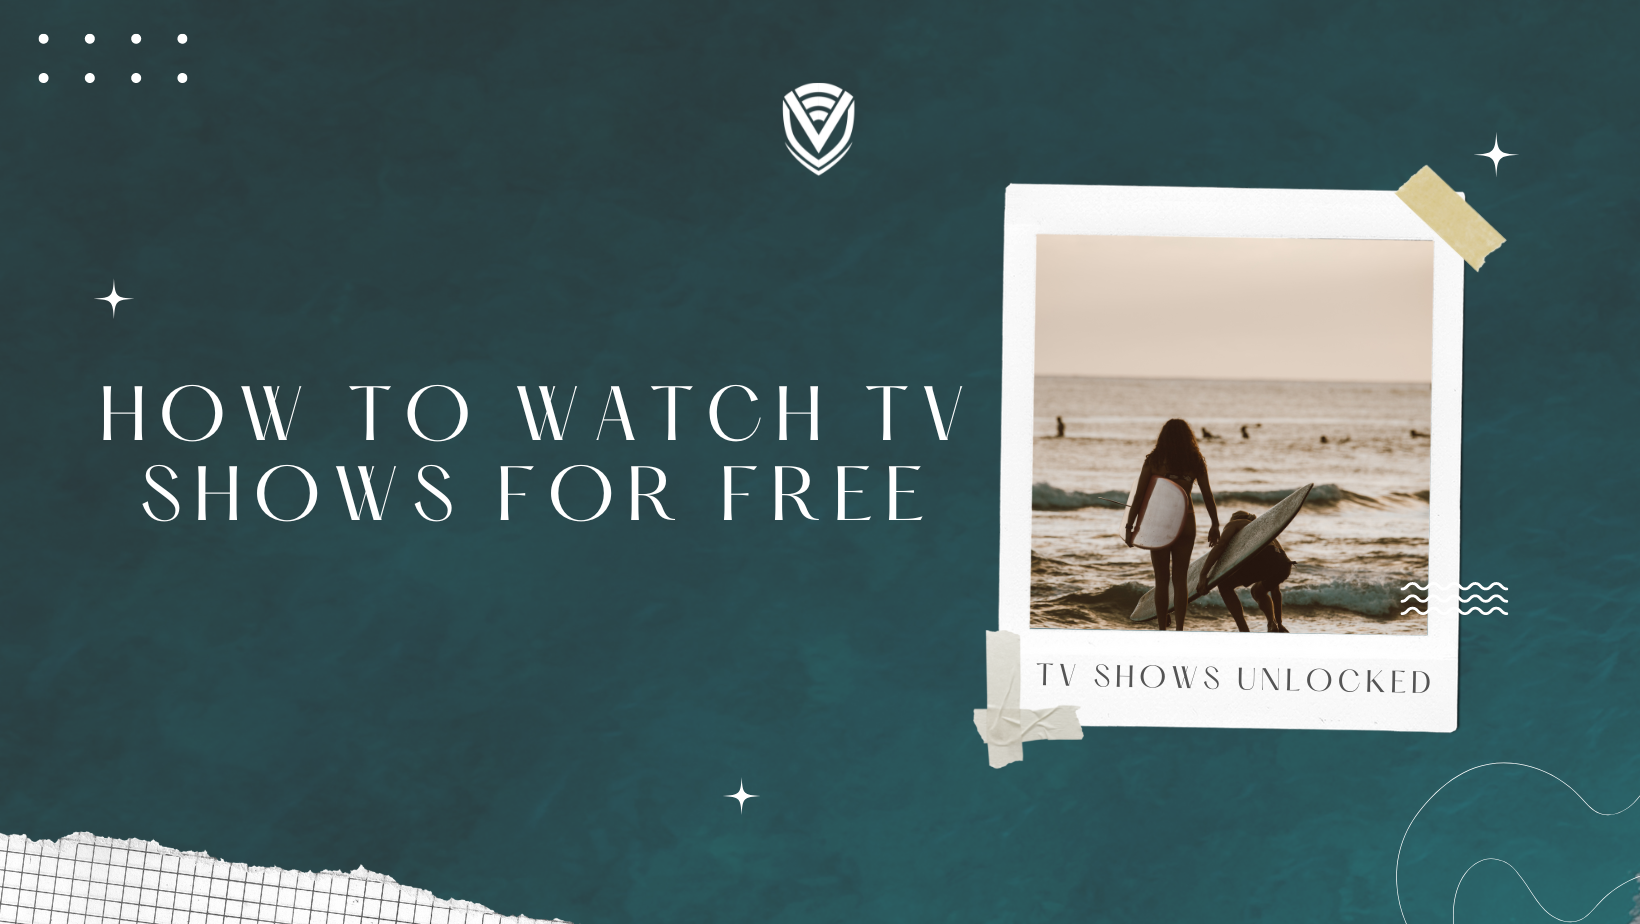 How to watch TV shows online for free (Legally)